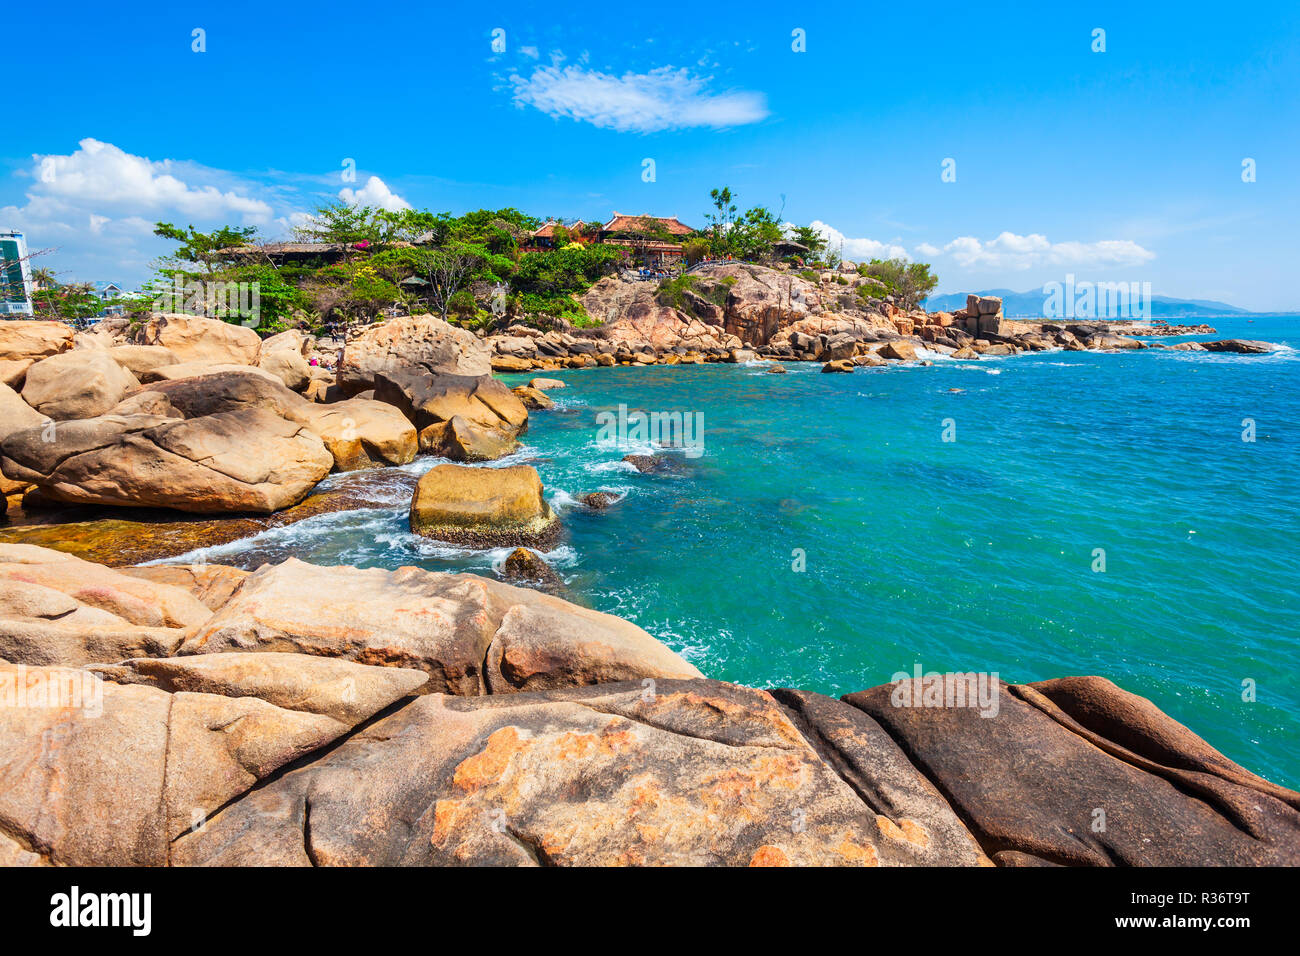 Hon Chong cape rock garden is a popular tourist attraction in Nha Trang city in Vietnam Stock Photo